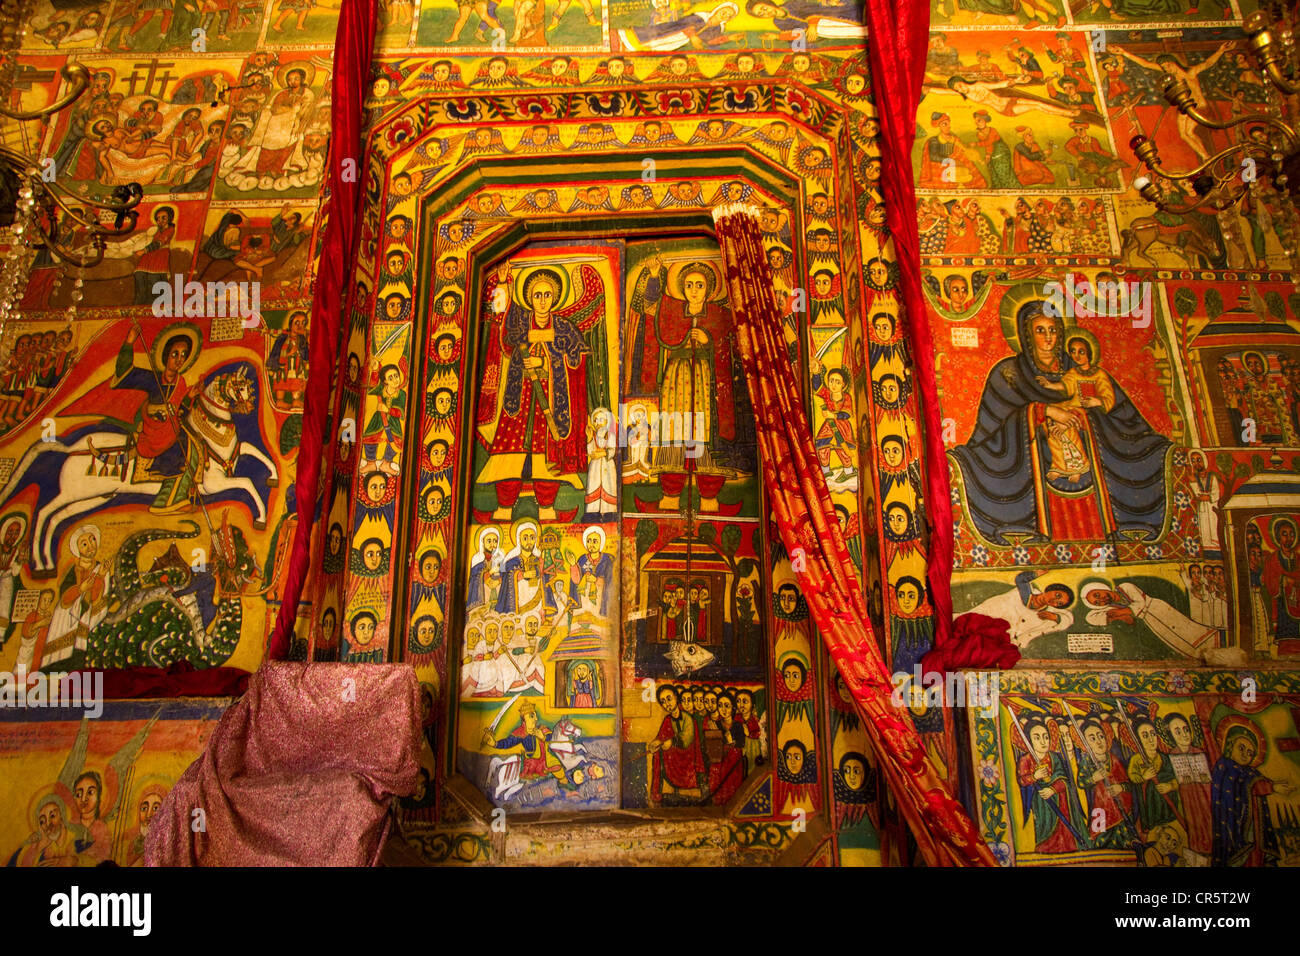 Colourful scenes from the Bible, Bet Maryam Monastery, Bahir Dar, Ethiopia, Africa Stock Photo